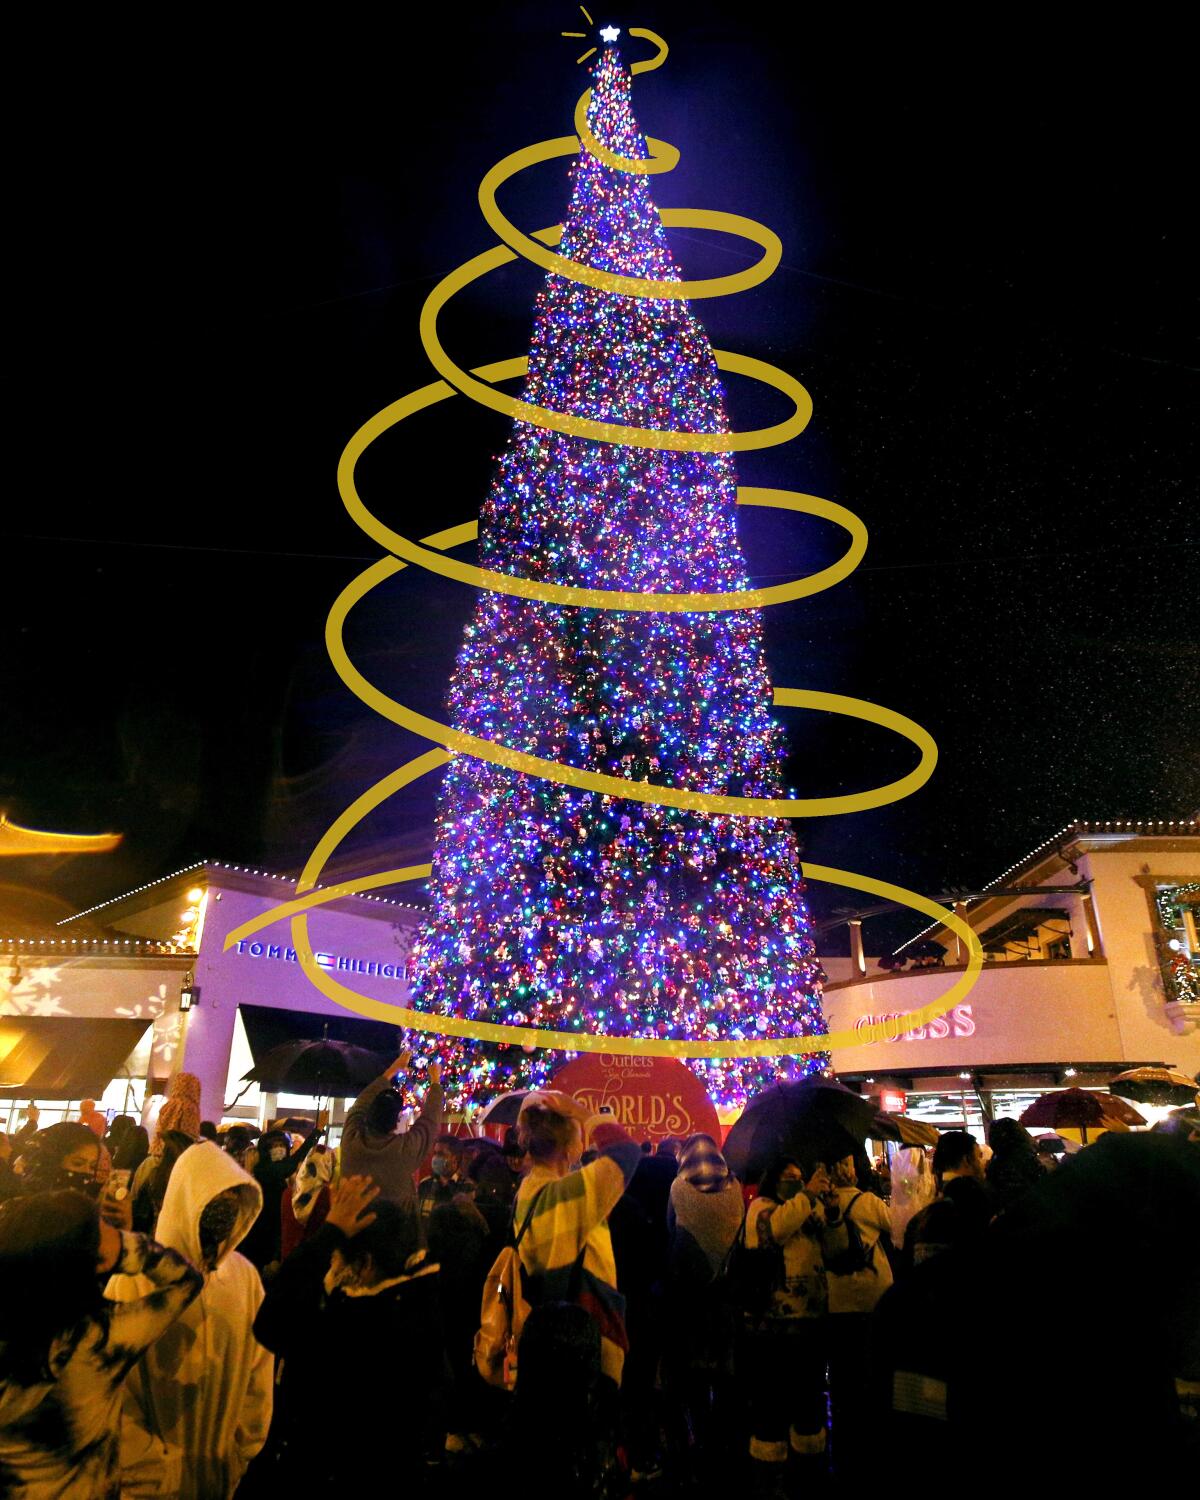 The 125-foot-tall lighted Christmas tree on display at the Outlets at San Clemente.